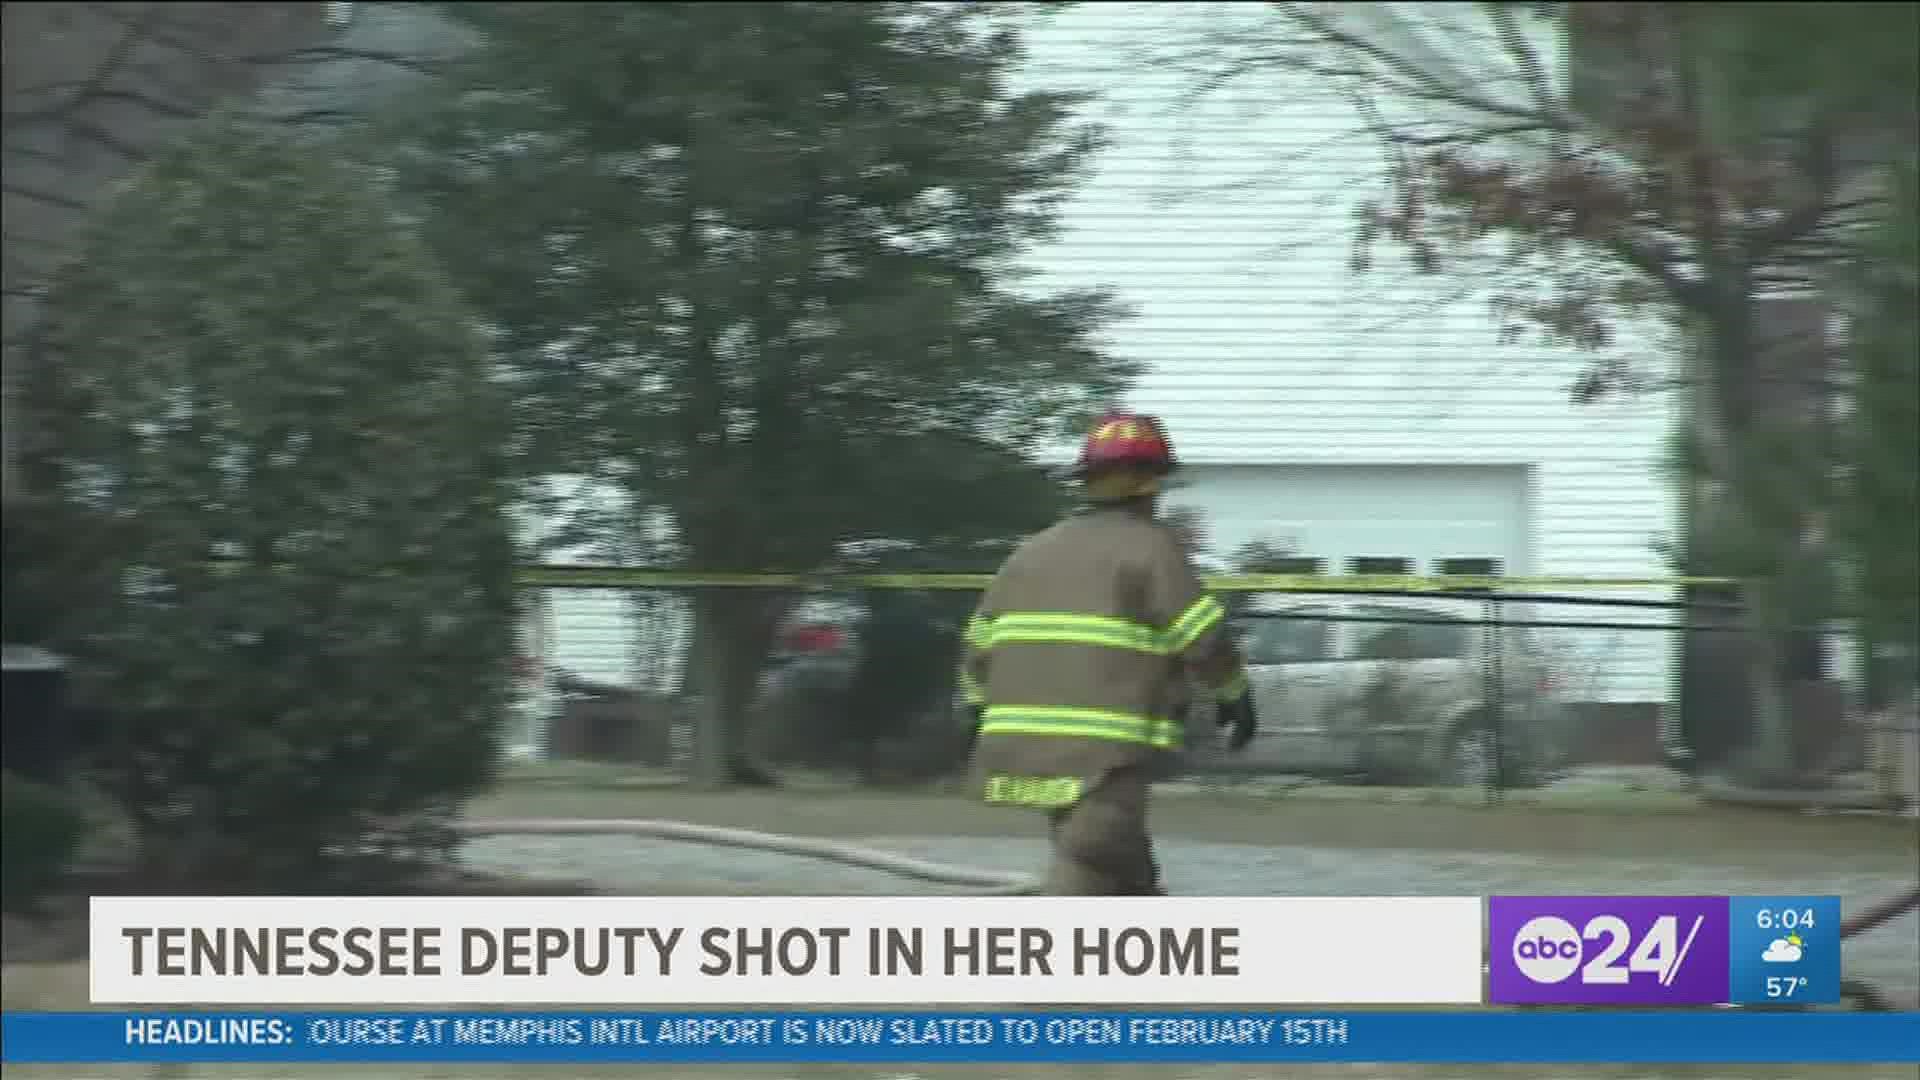 The sheriff's office said a deputy went to her home on Highway 41N in Springfield to check on her and found her home engulfed in flames.